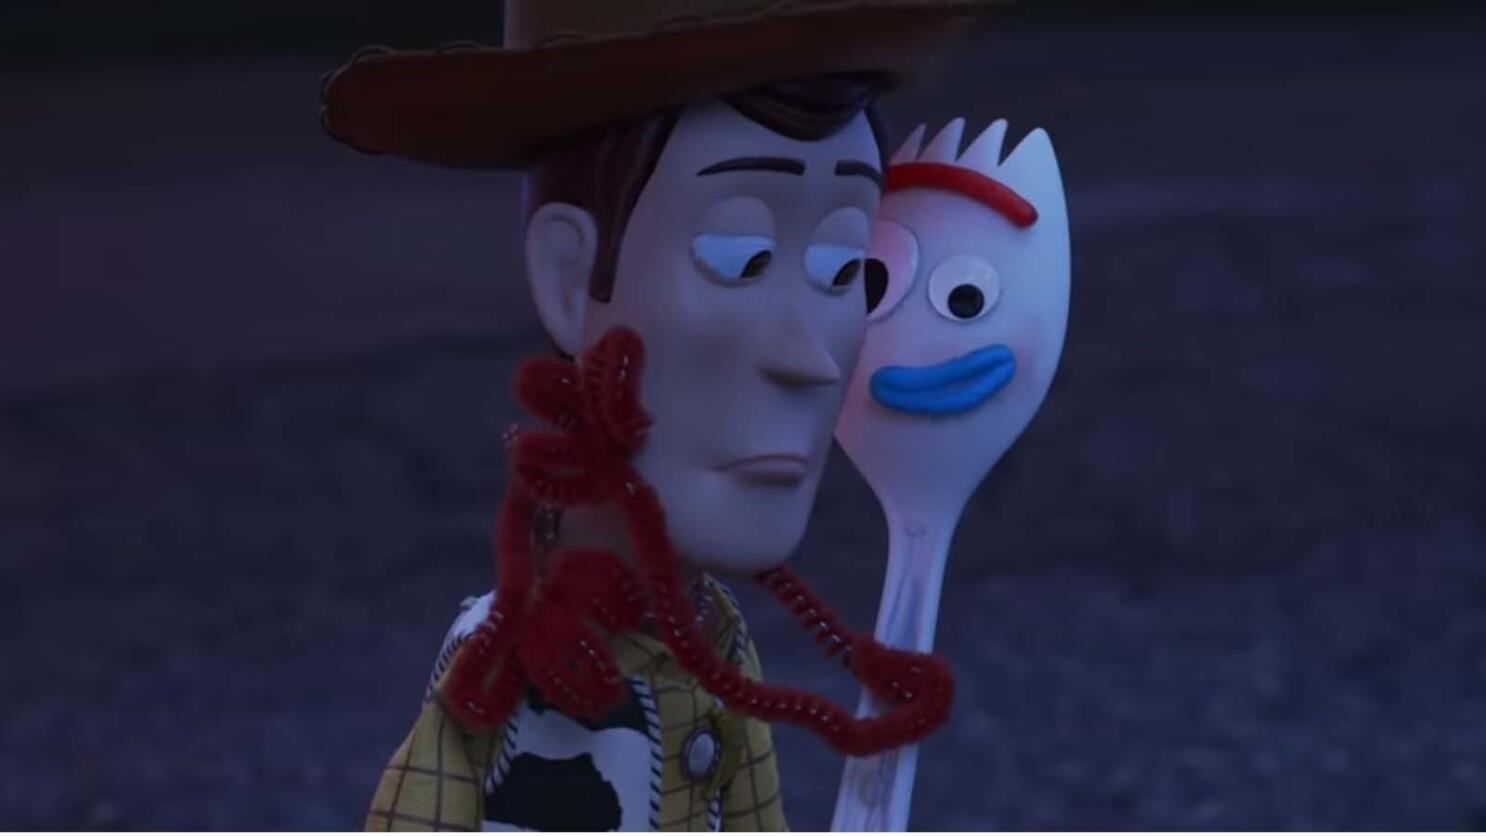 OpEd: Forky Gave Me a Change of Heart About Toy Story 4 - Inside the Magic